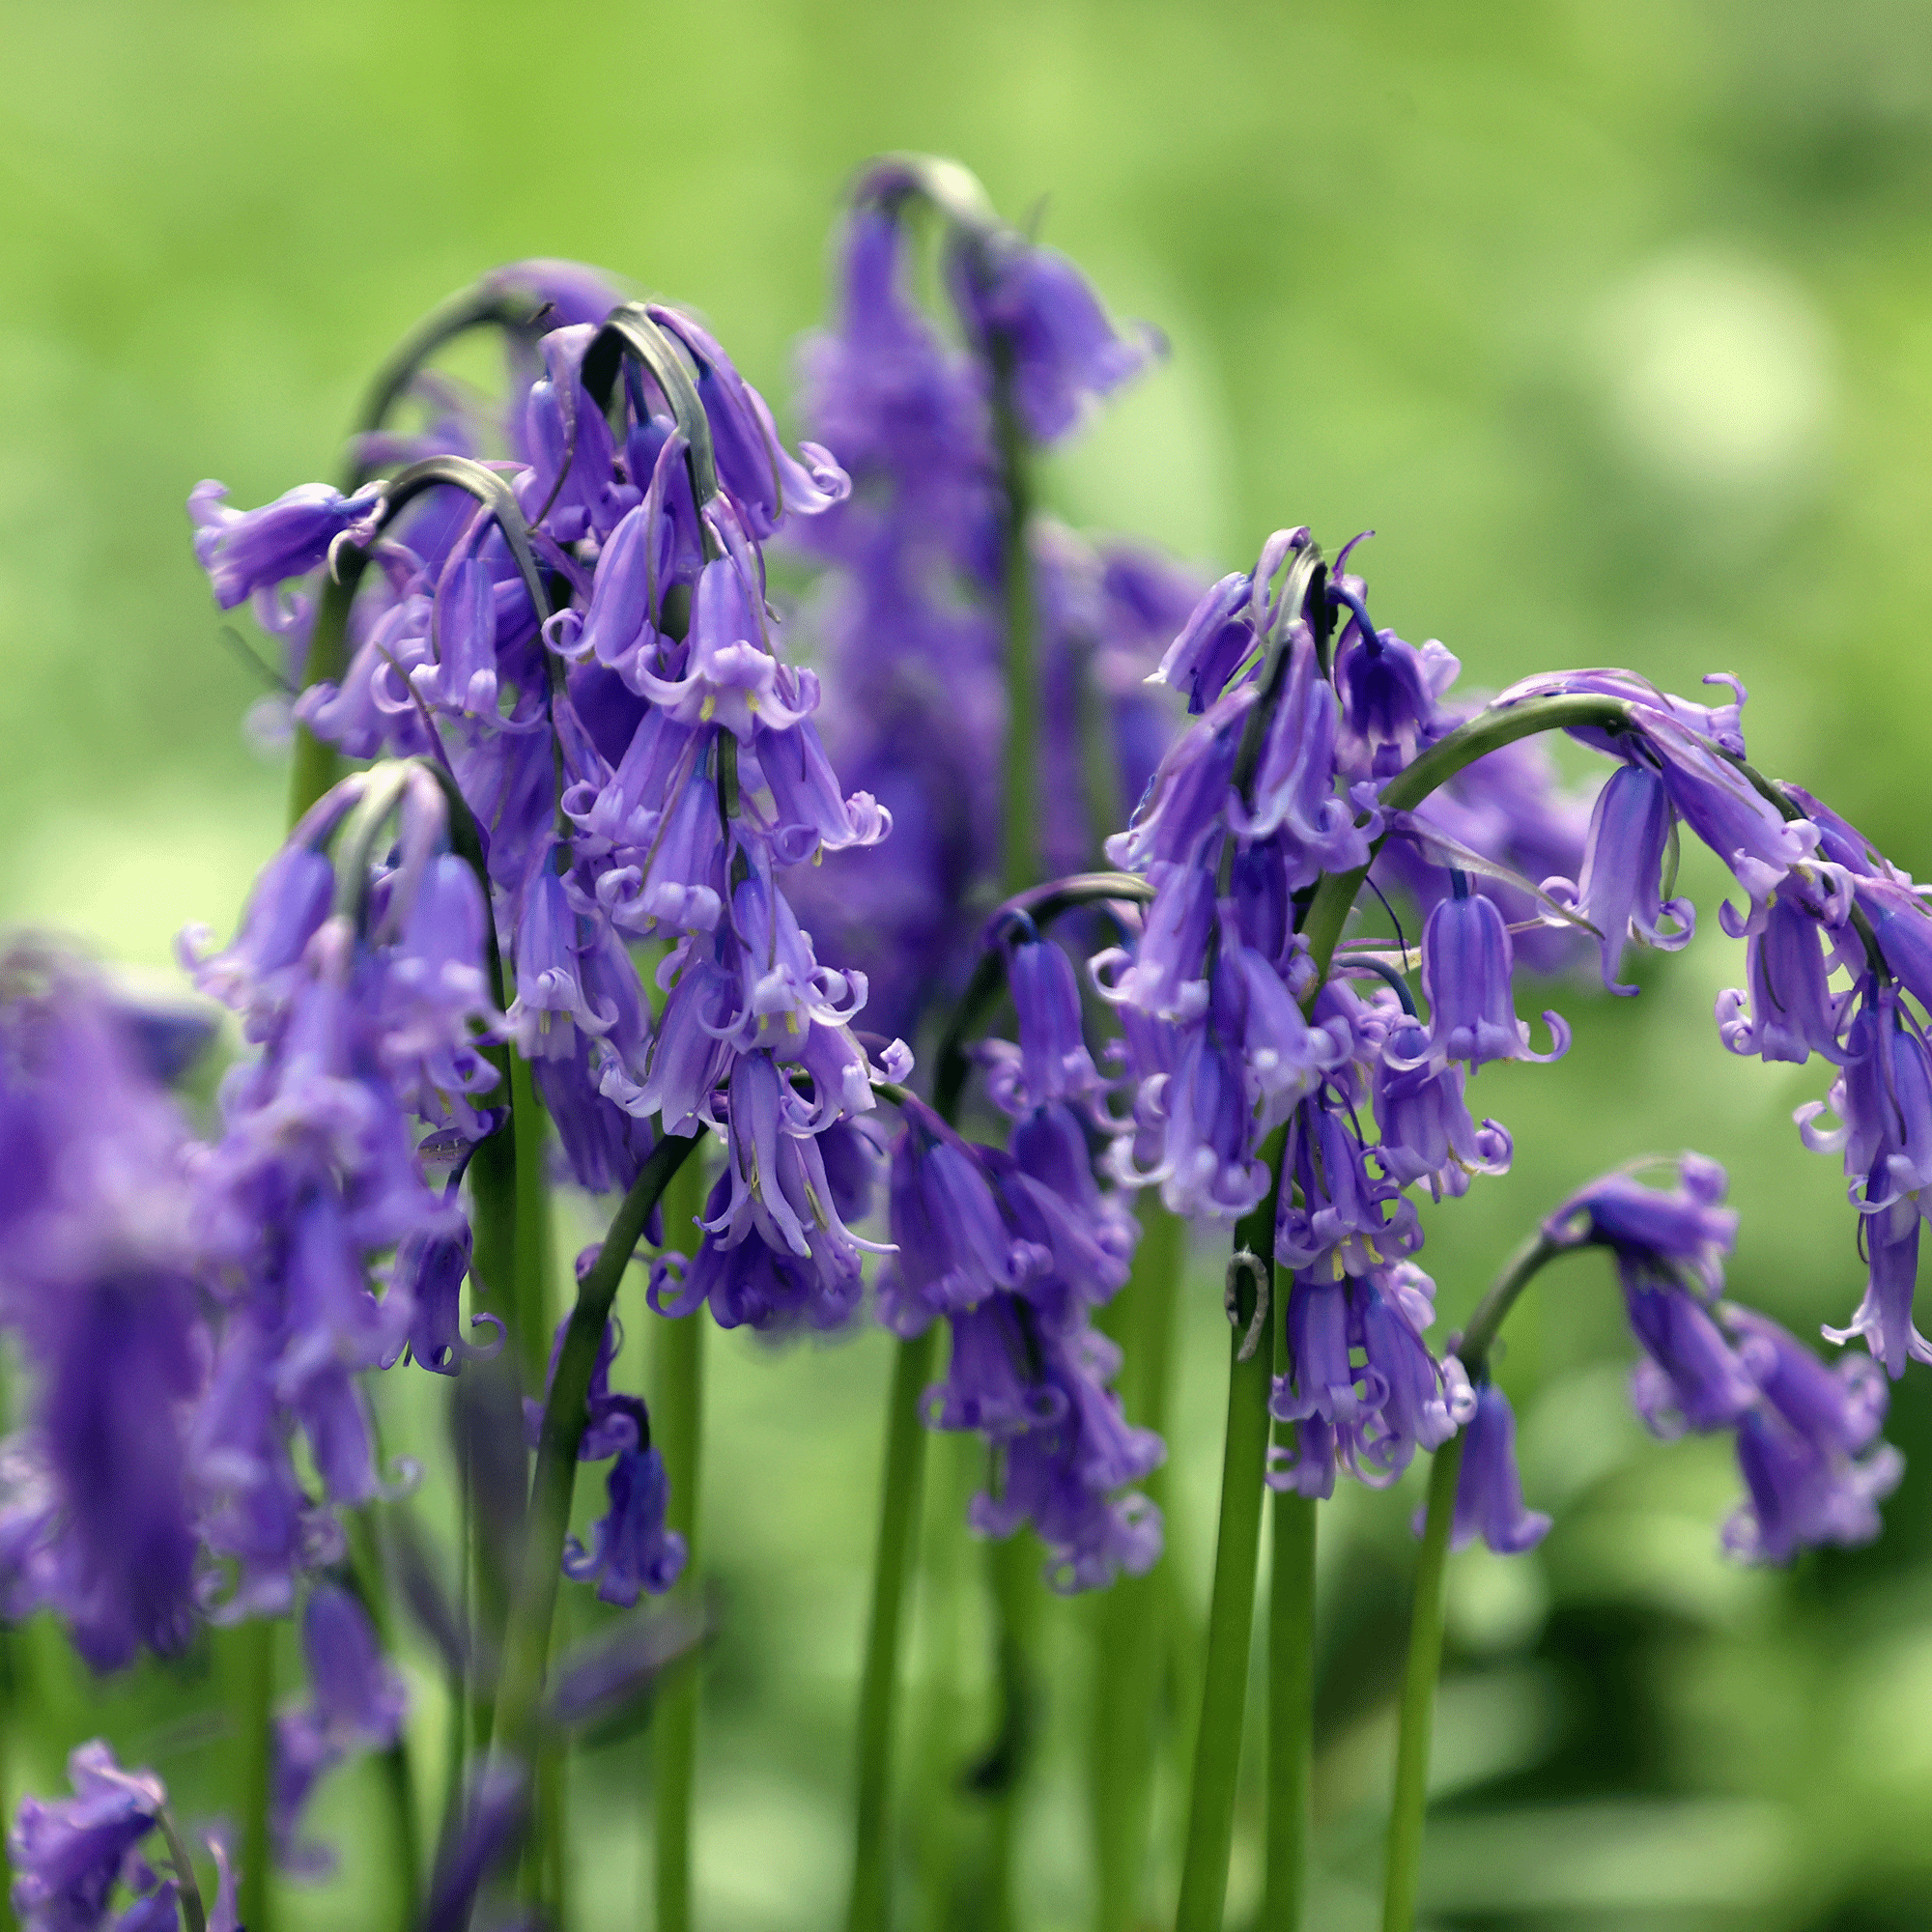 How to plant bluebell bulbs - the easiest way to start your own woodland-inspired garden